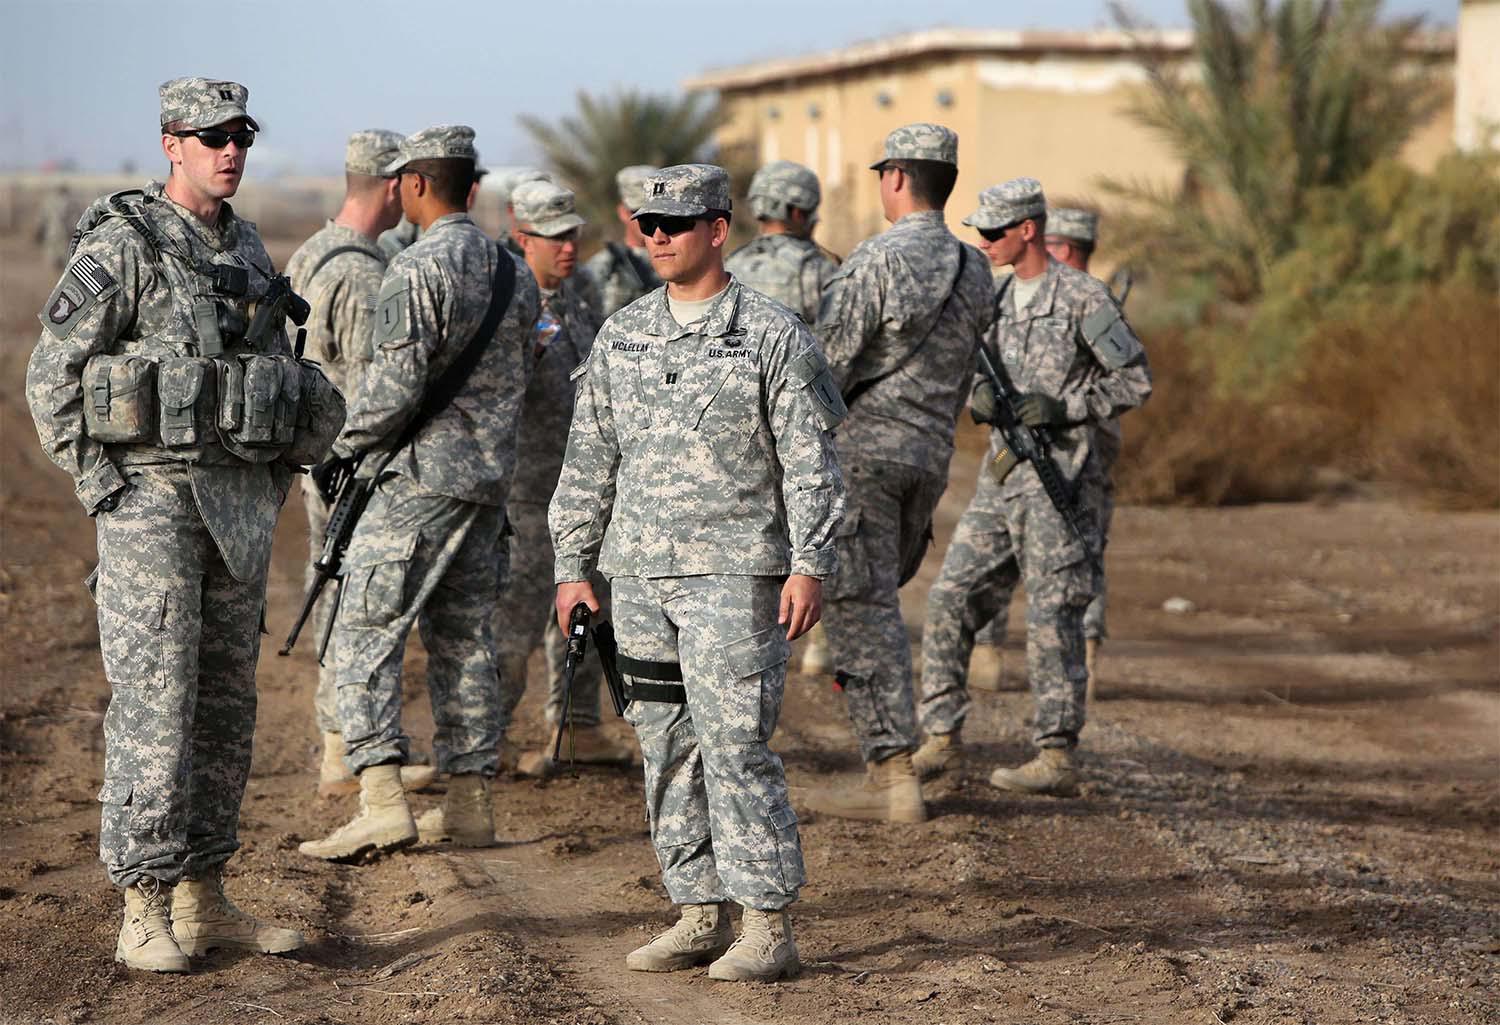 The US has around 5,200 troops that were deployed in Iraq to fight the Islamic State militant group